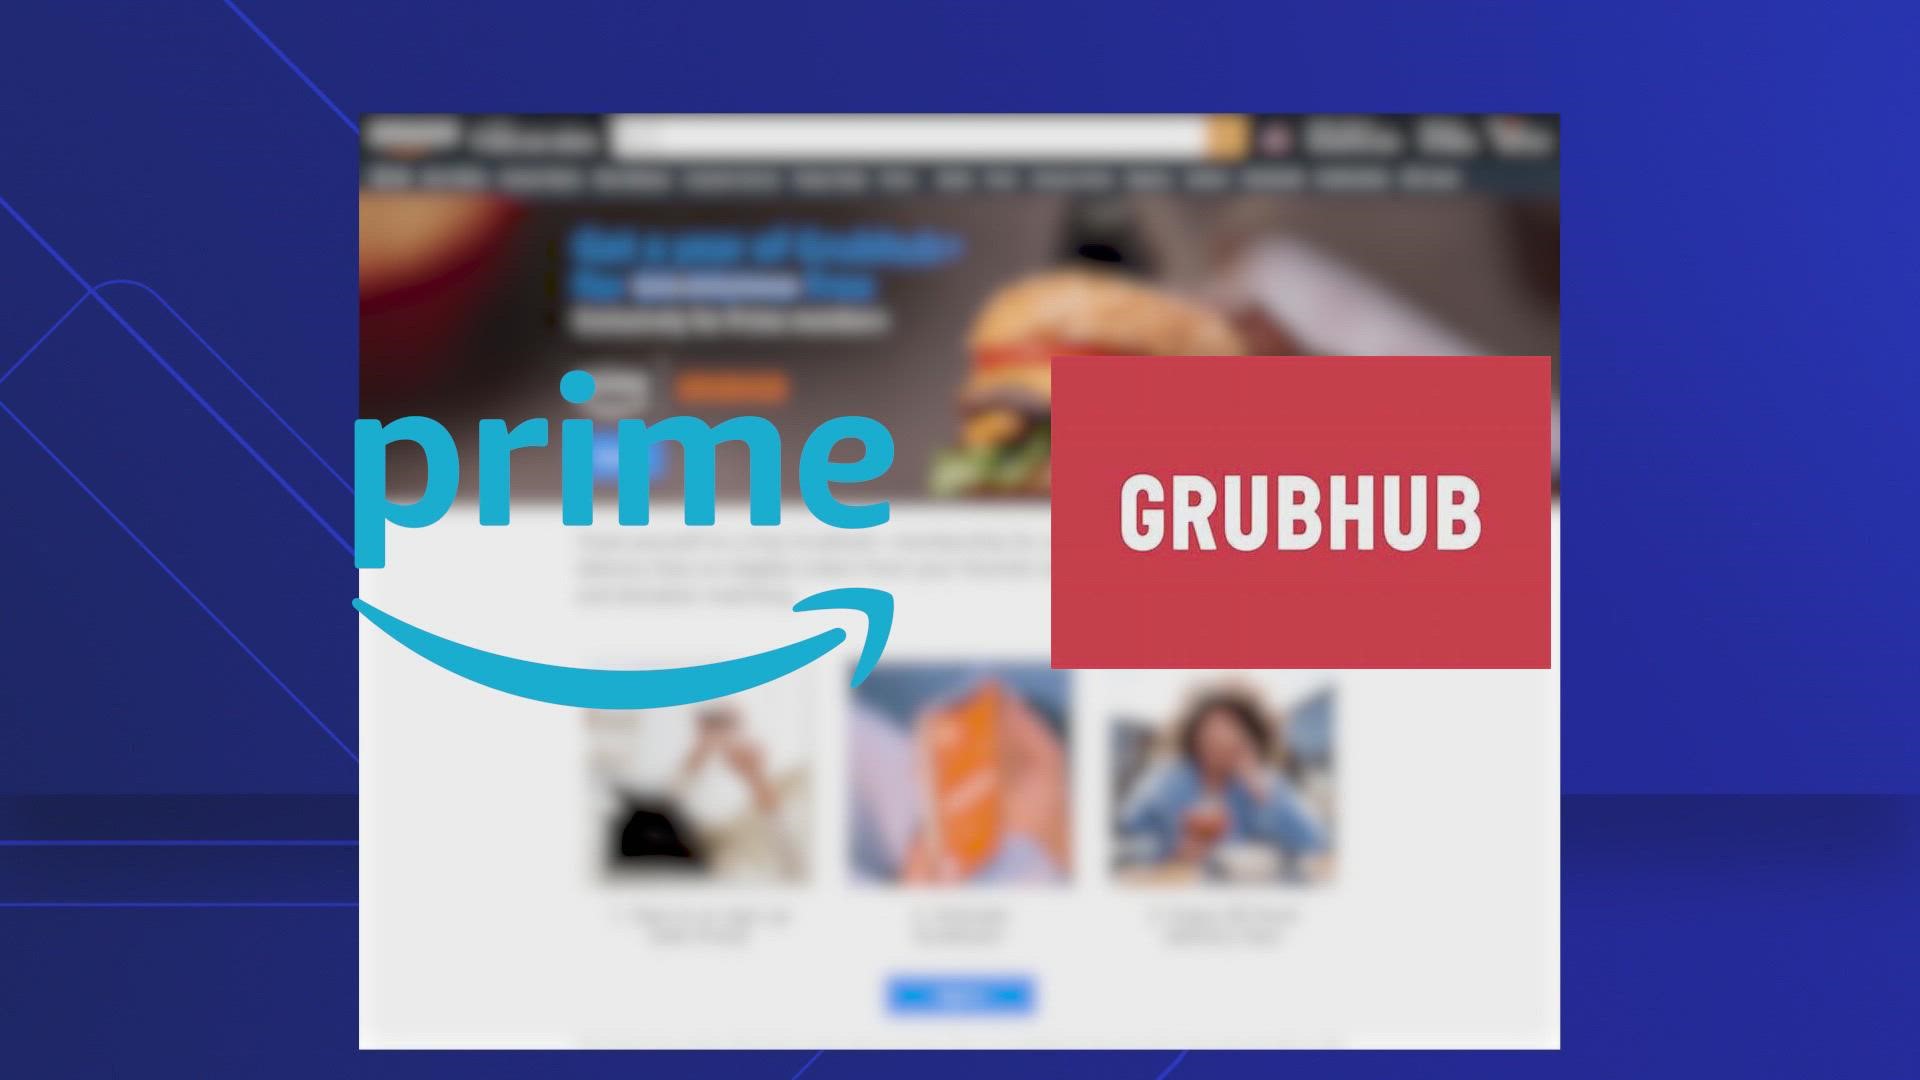 Grubhub’s subscription service usually costs $9.99.